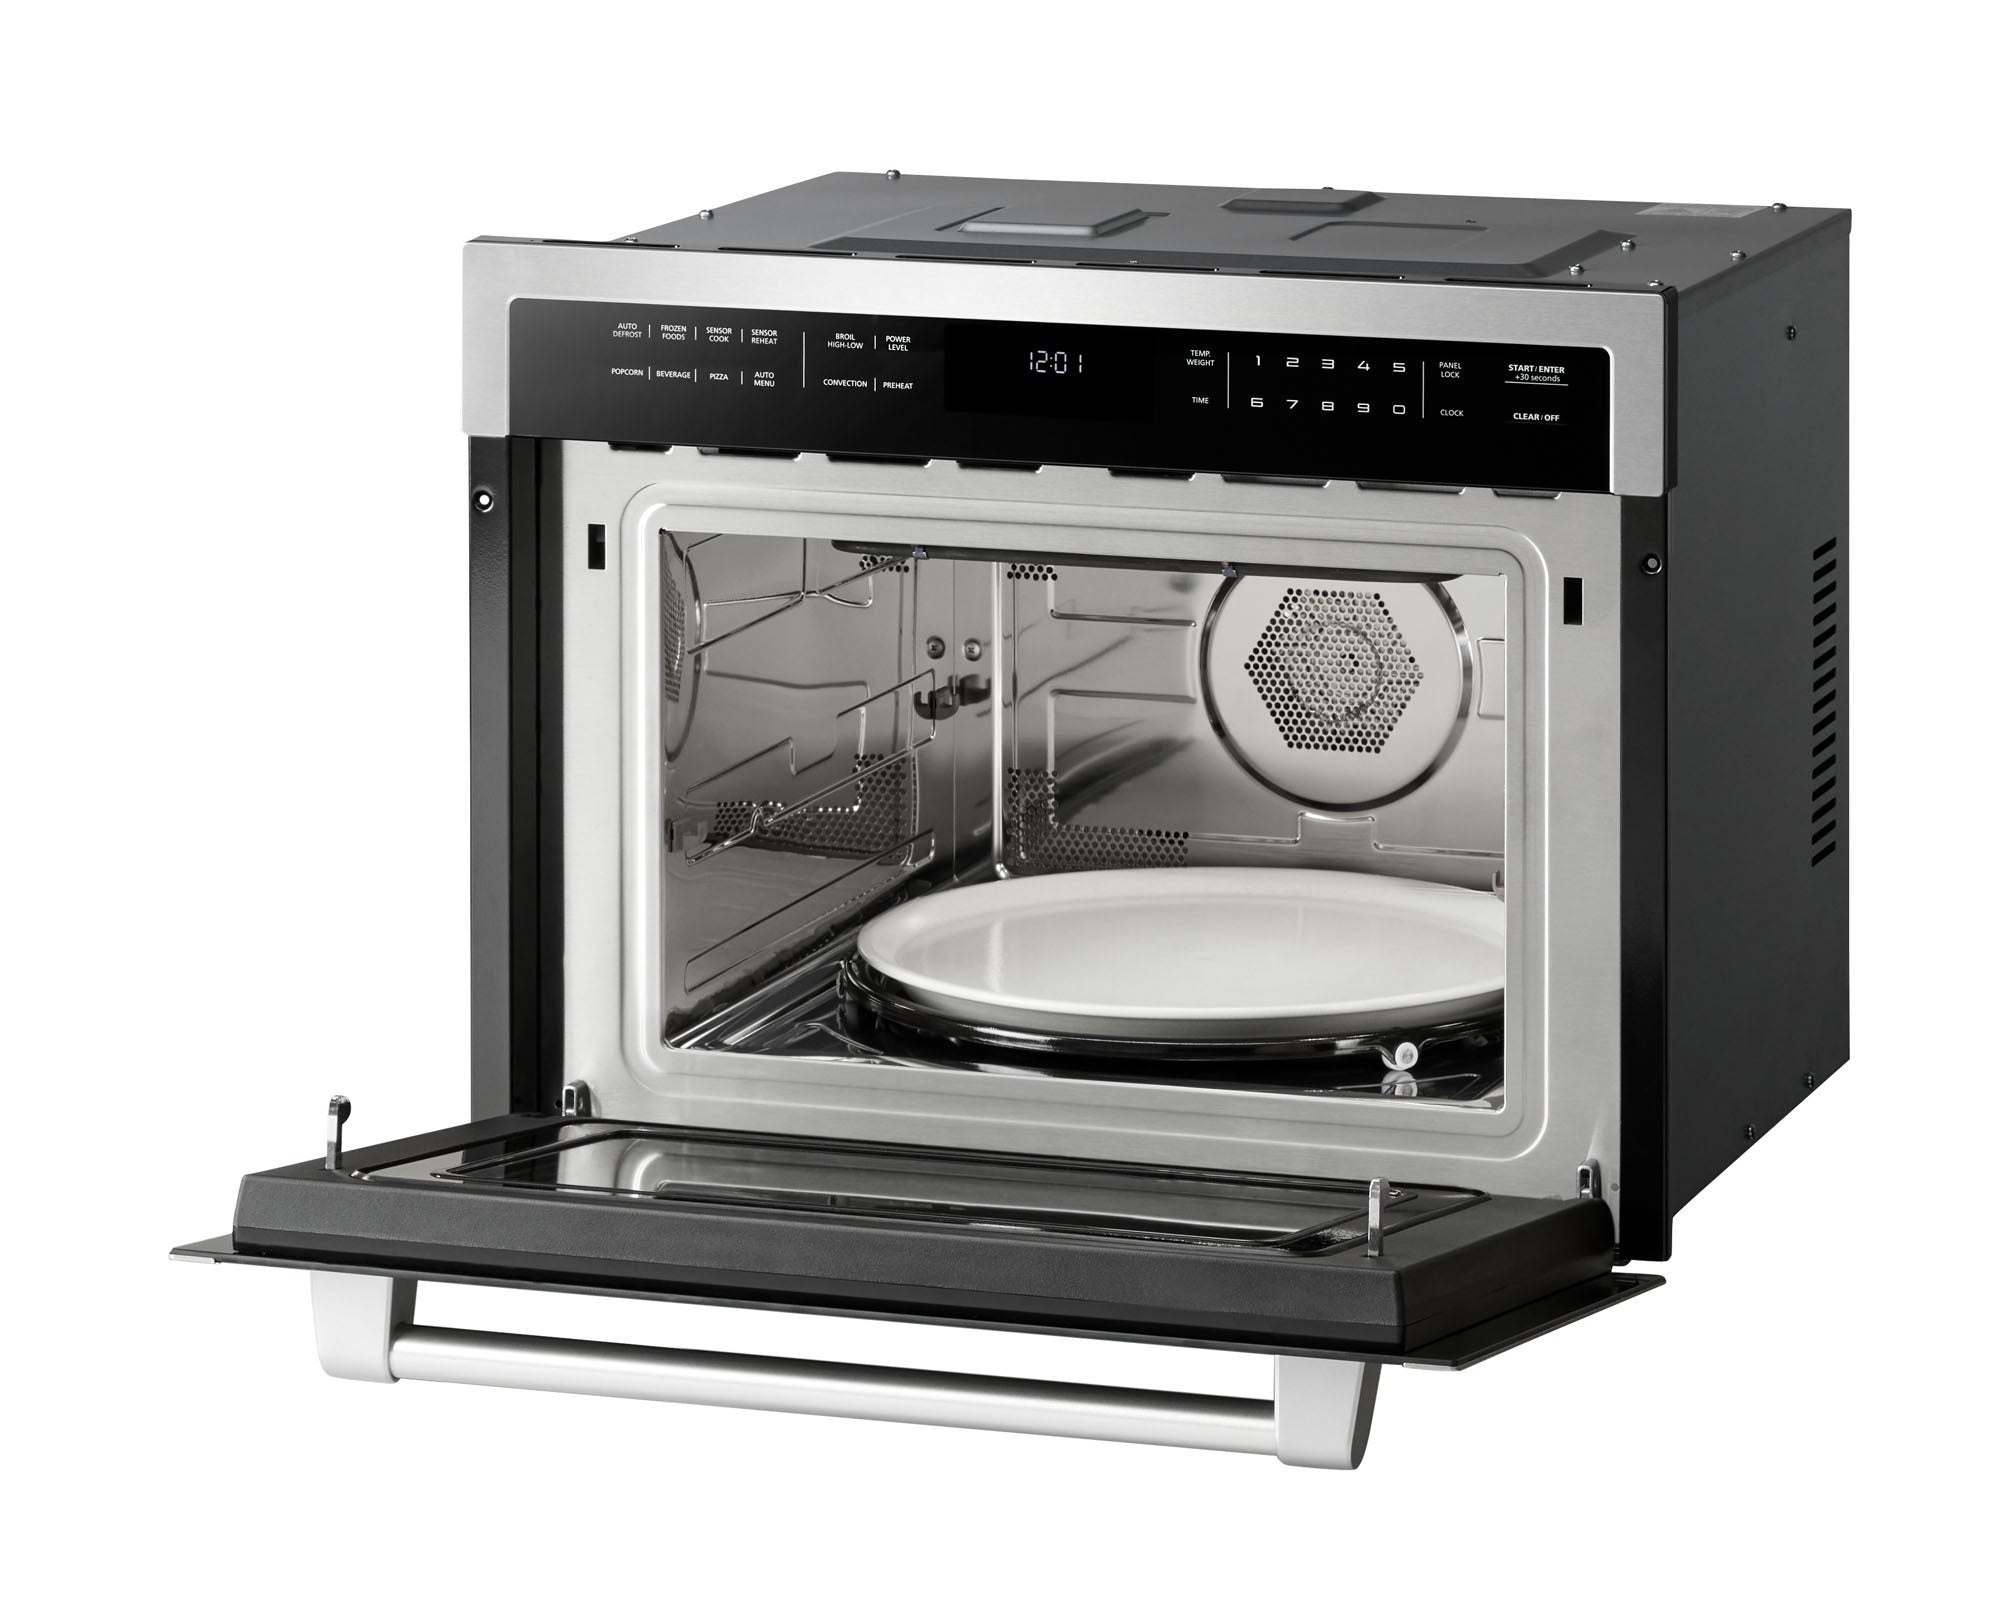 TECHNO COLLECTION 23 LT METAL/GLASS MICROWAVE